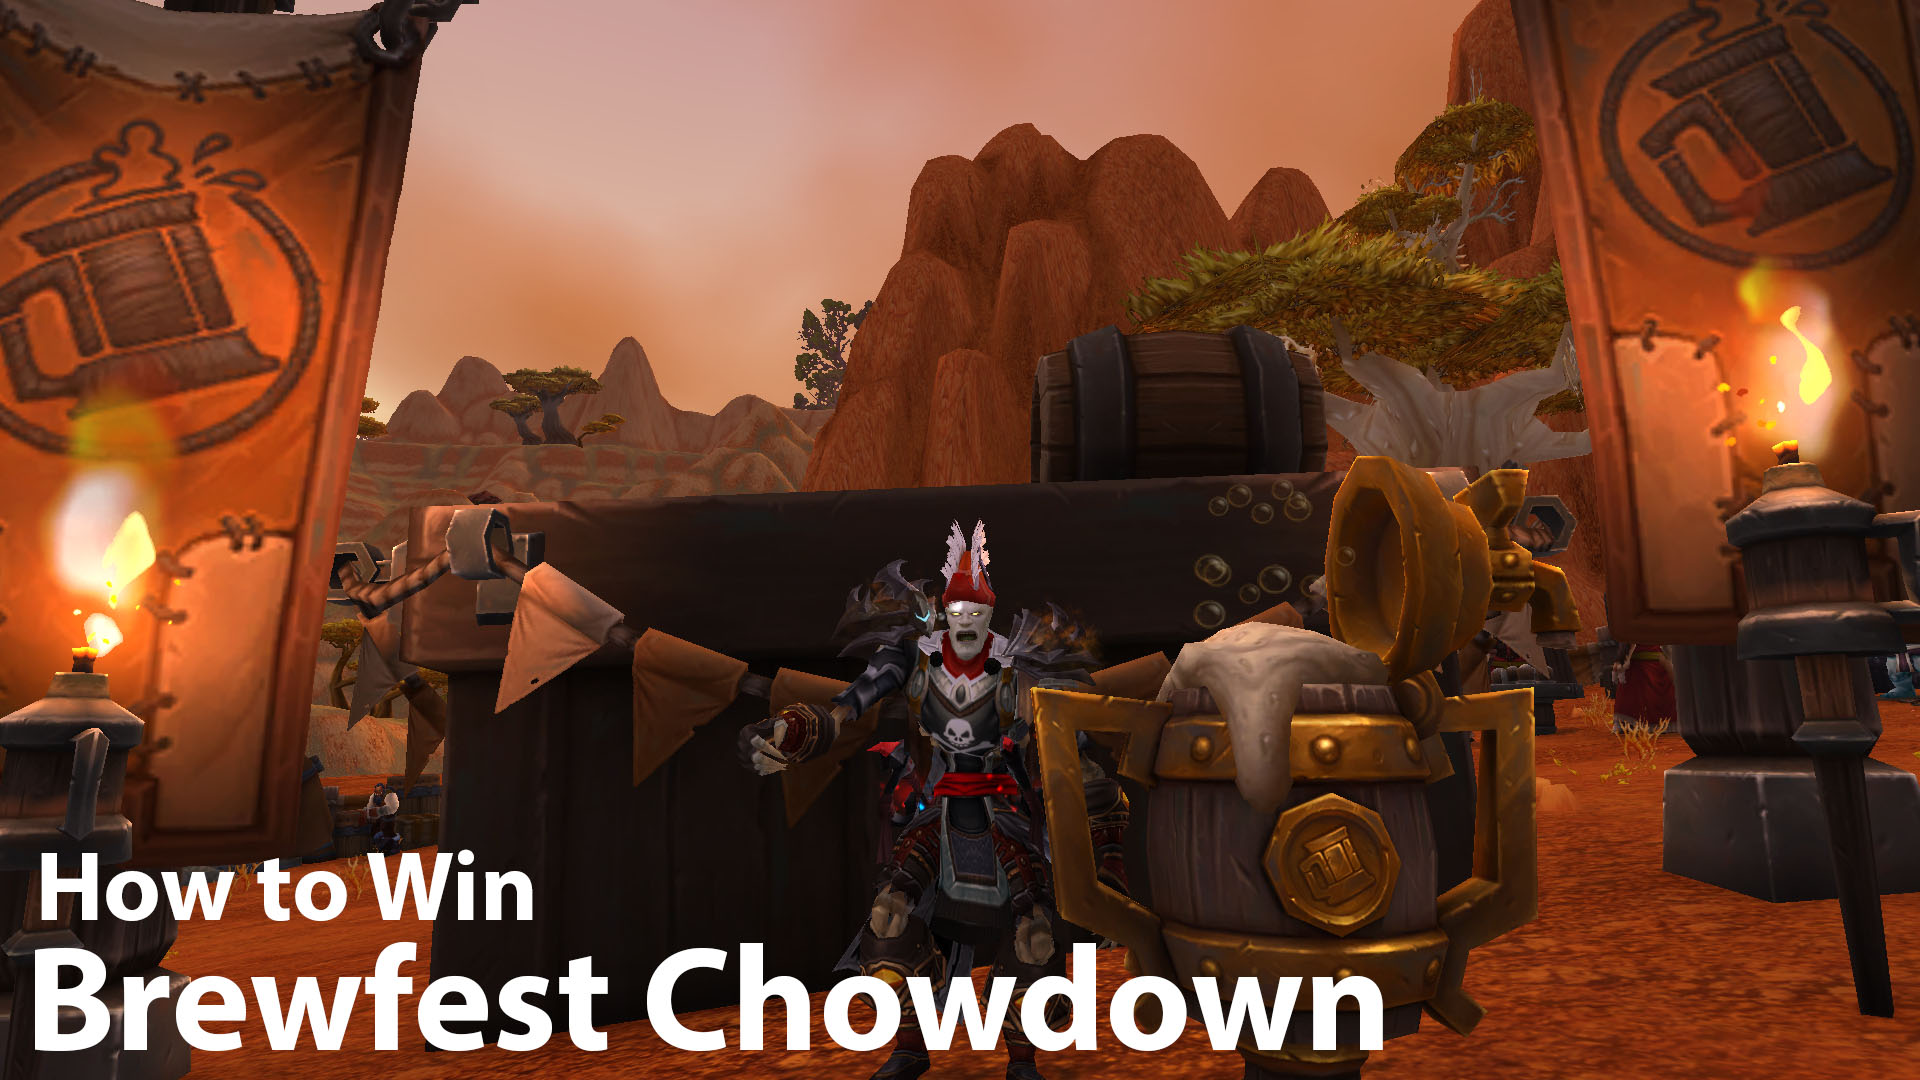 How to Win the Brewfest Chowdown